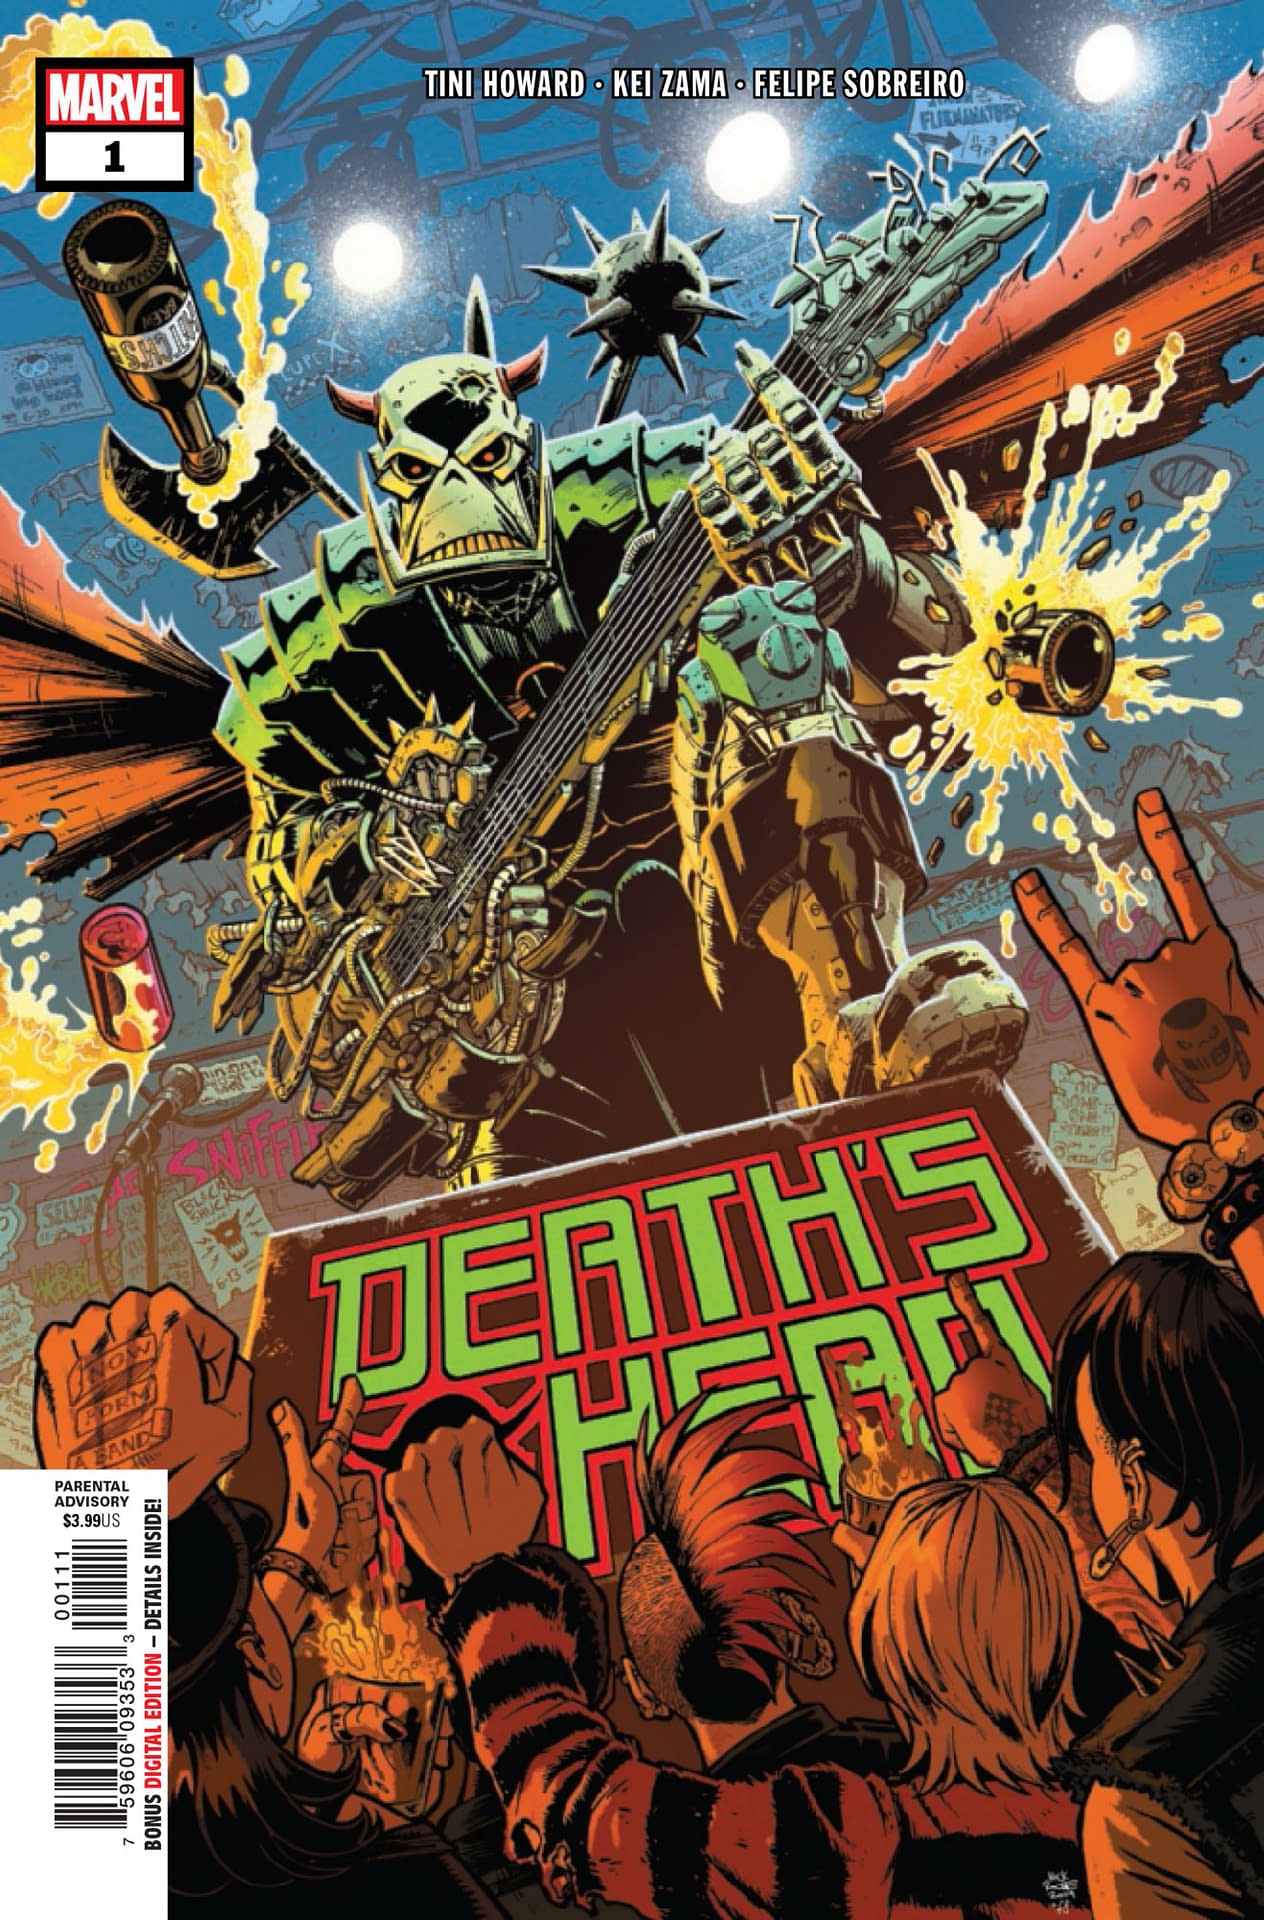 Wiccan and Hulkling Return in Death's Head #1 [Preview]